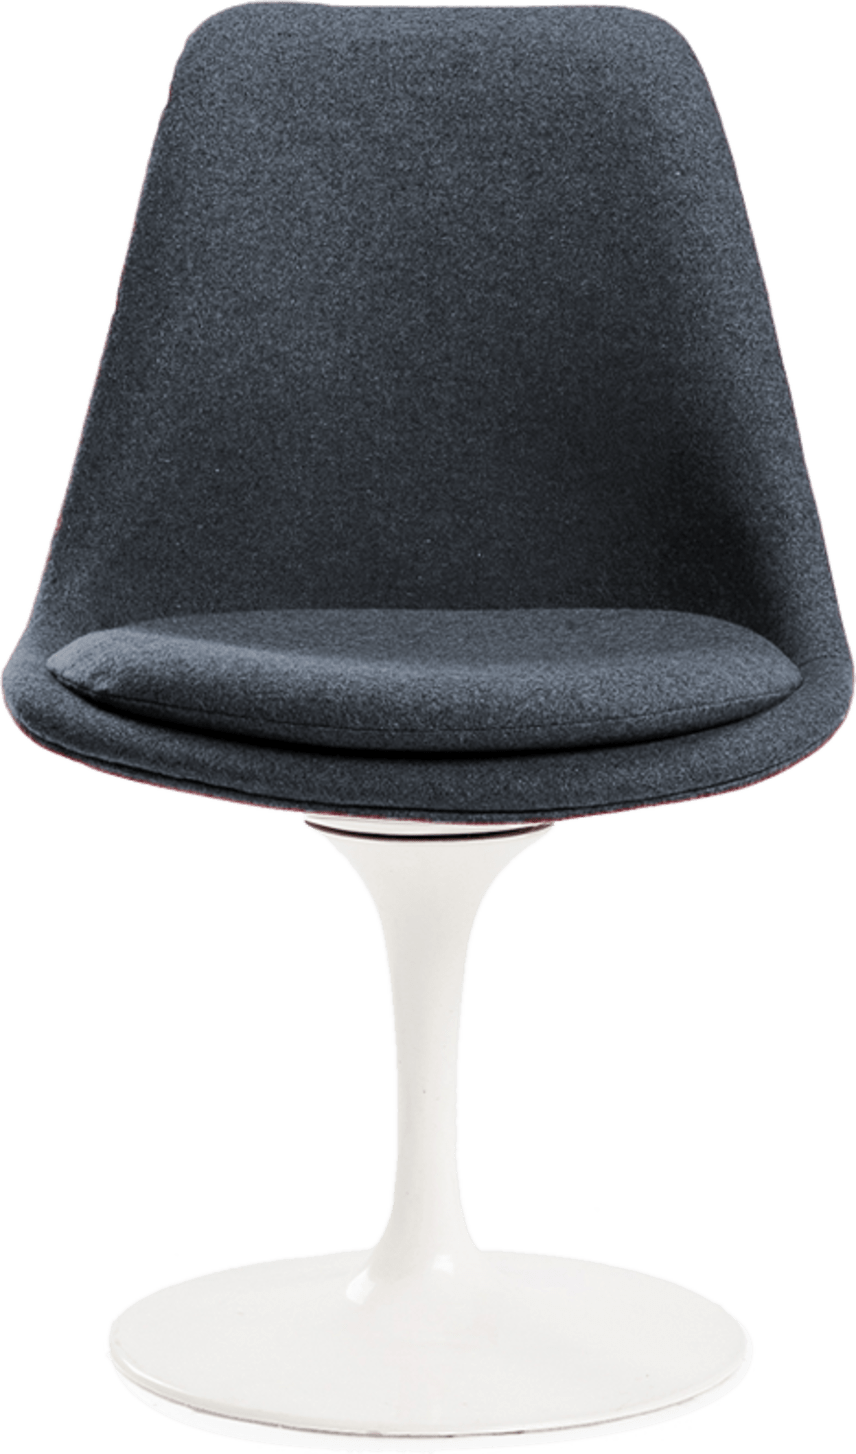 Tulip Chair Upholstered Charcoal Grey image.